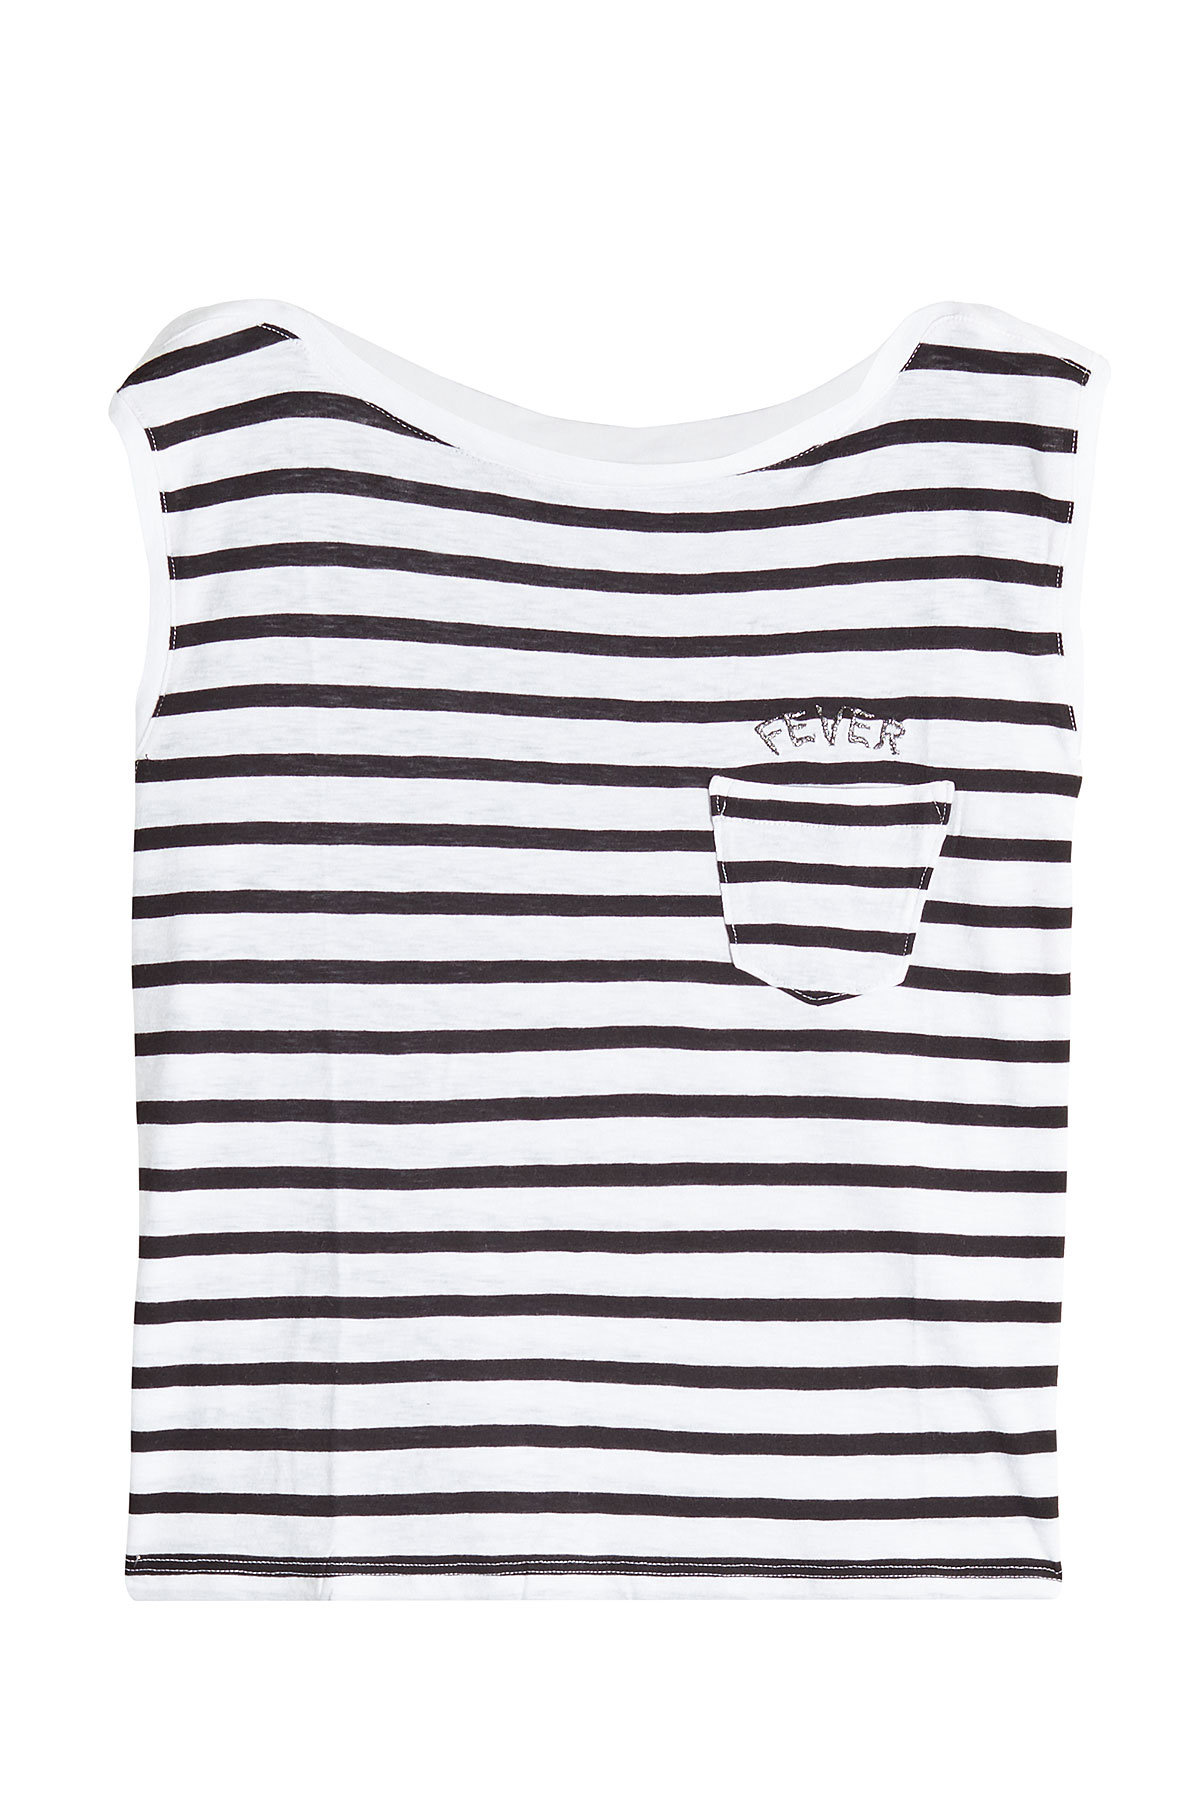 Zadig & Voltaire - Frida Striped Tank with Embroidery